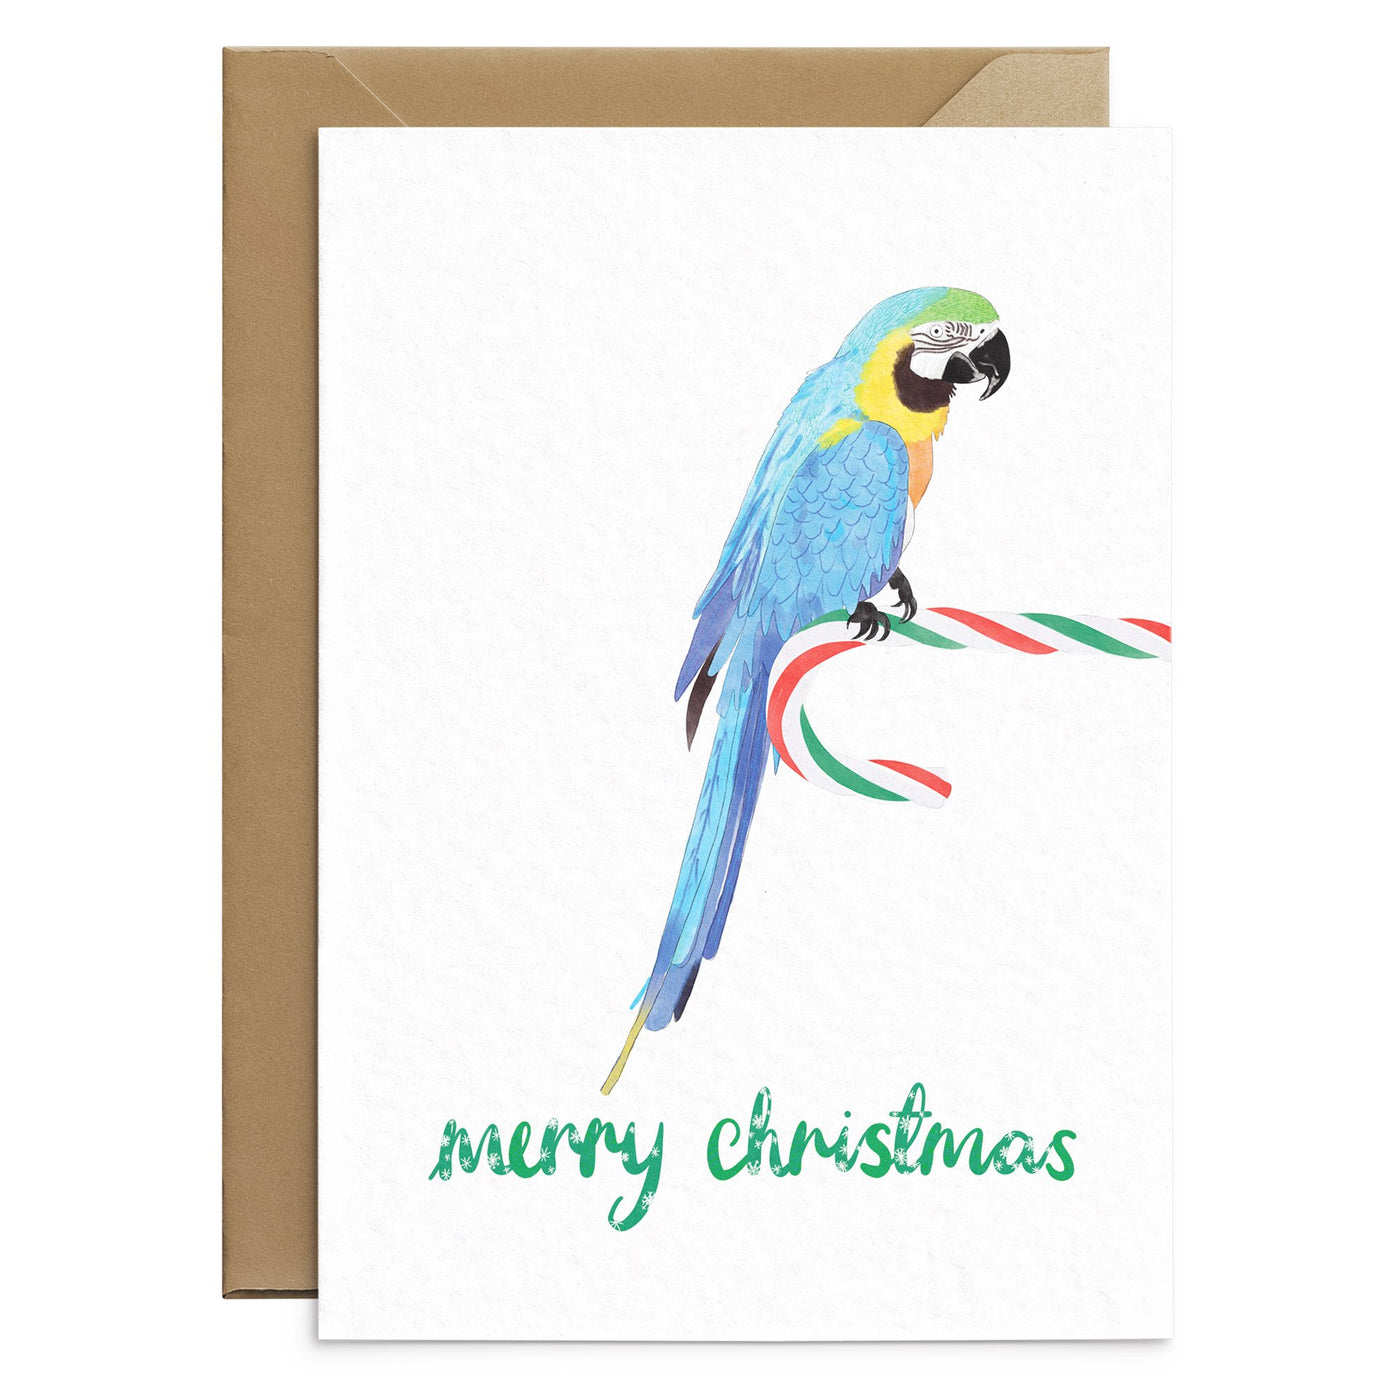 Cute Parrot Christmas Card - Poppins & Co.